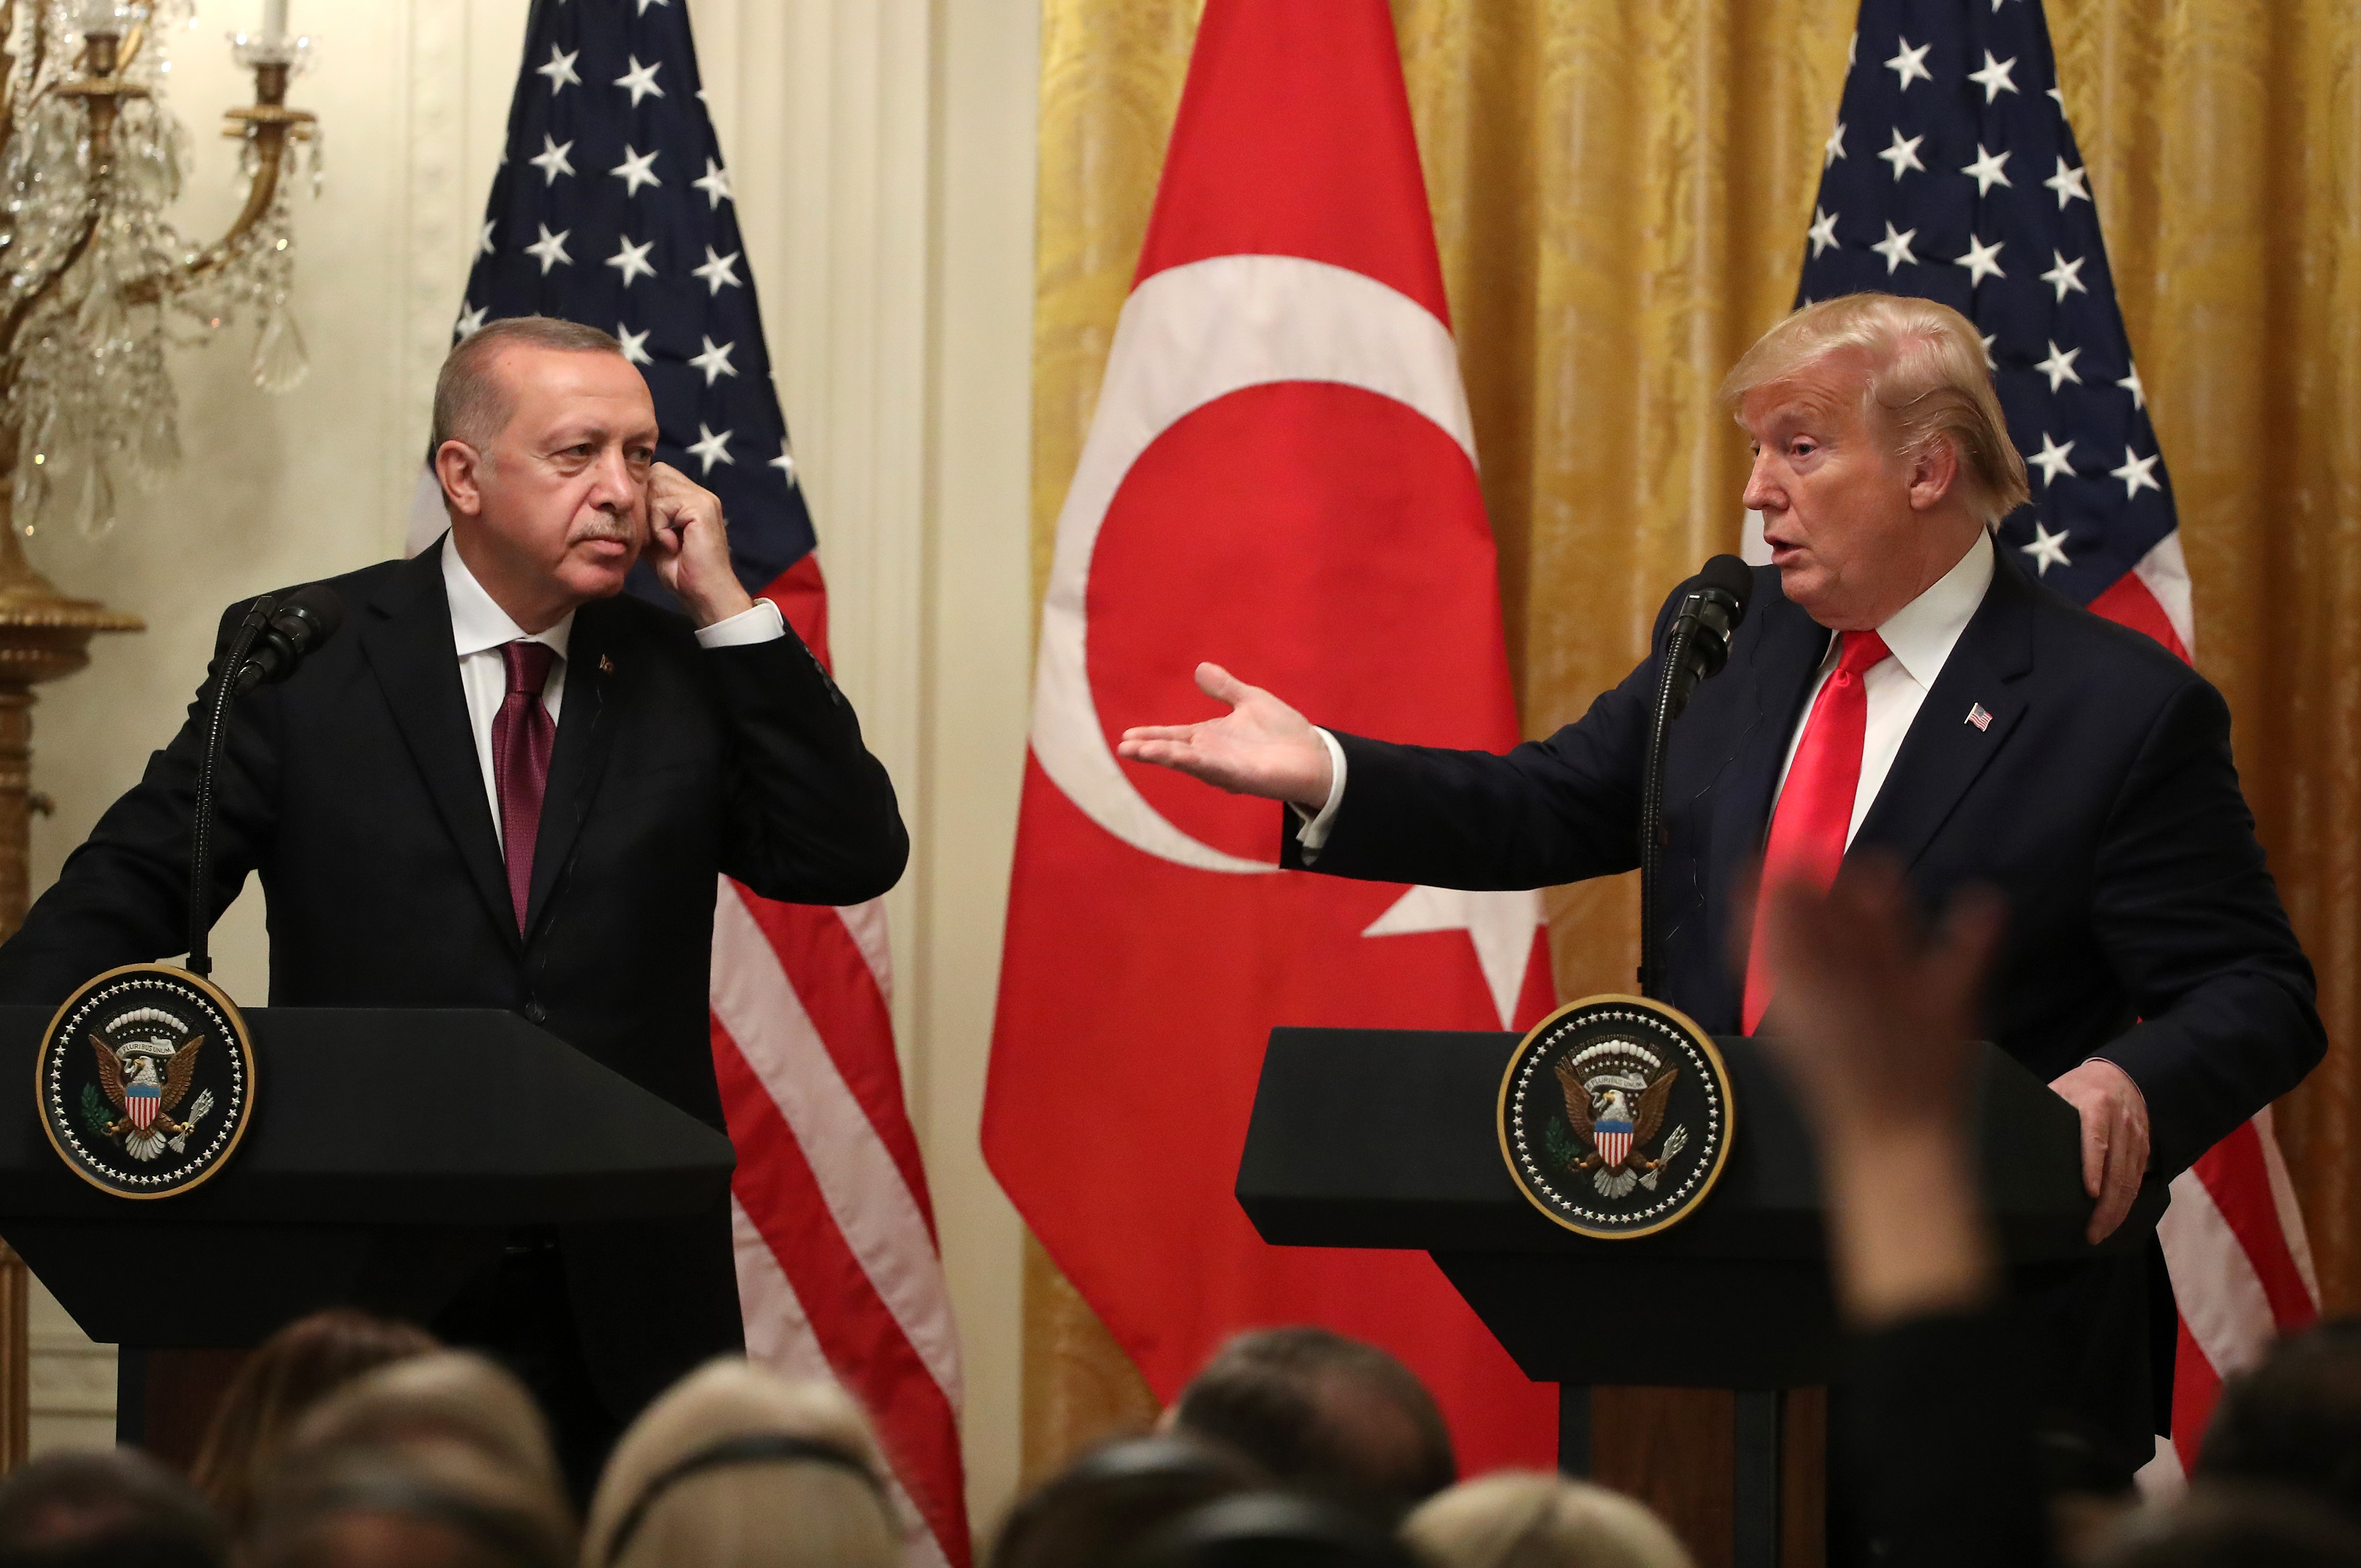 Trump showed he doesn’t understand Turkey — while standing next to Turkey’s president 6